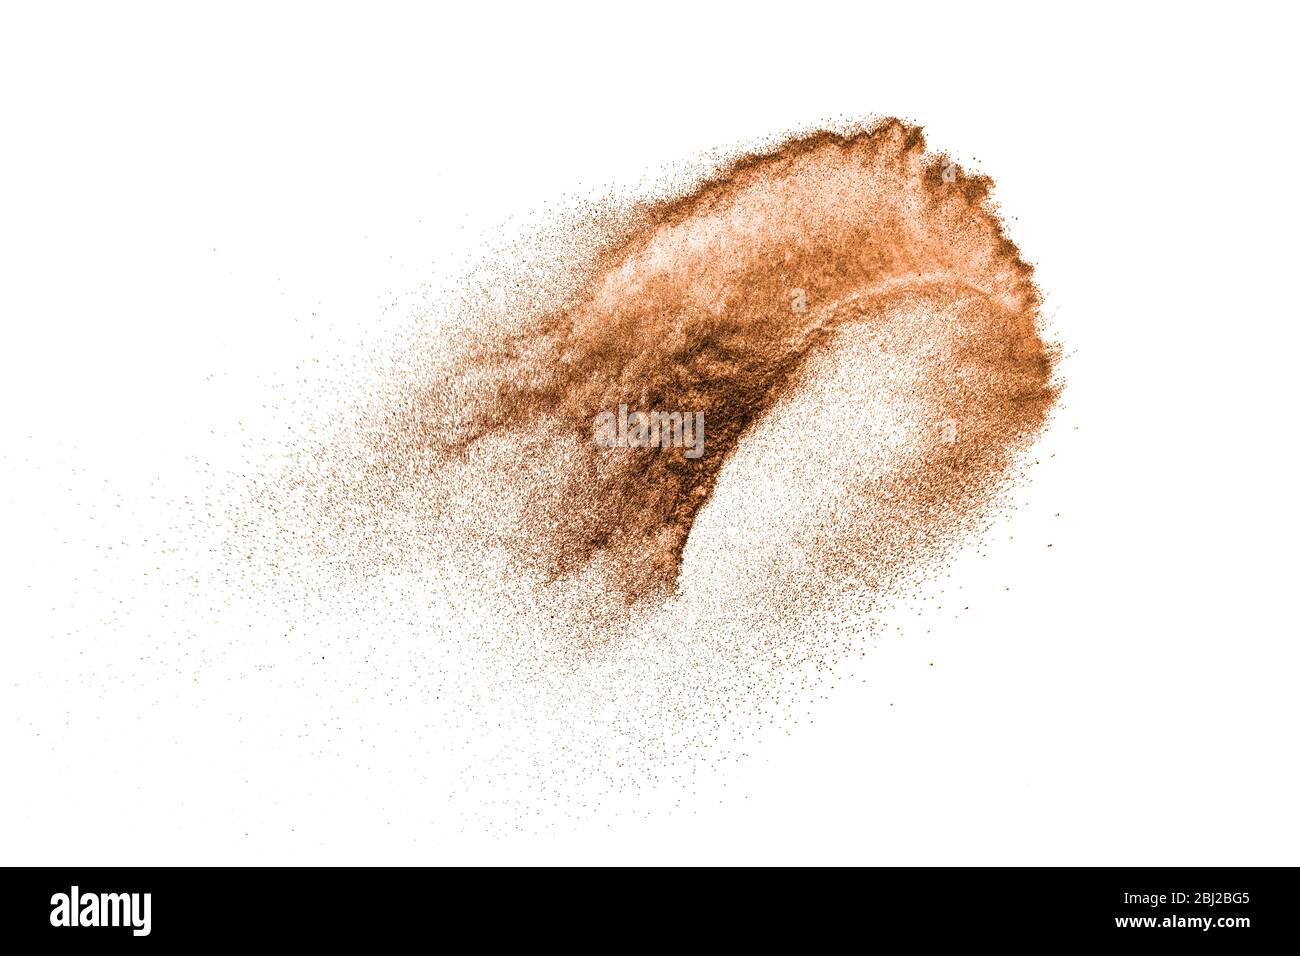 Brown powder dust cloud.Brown particles splattered on white background. Stock Photo